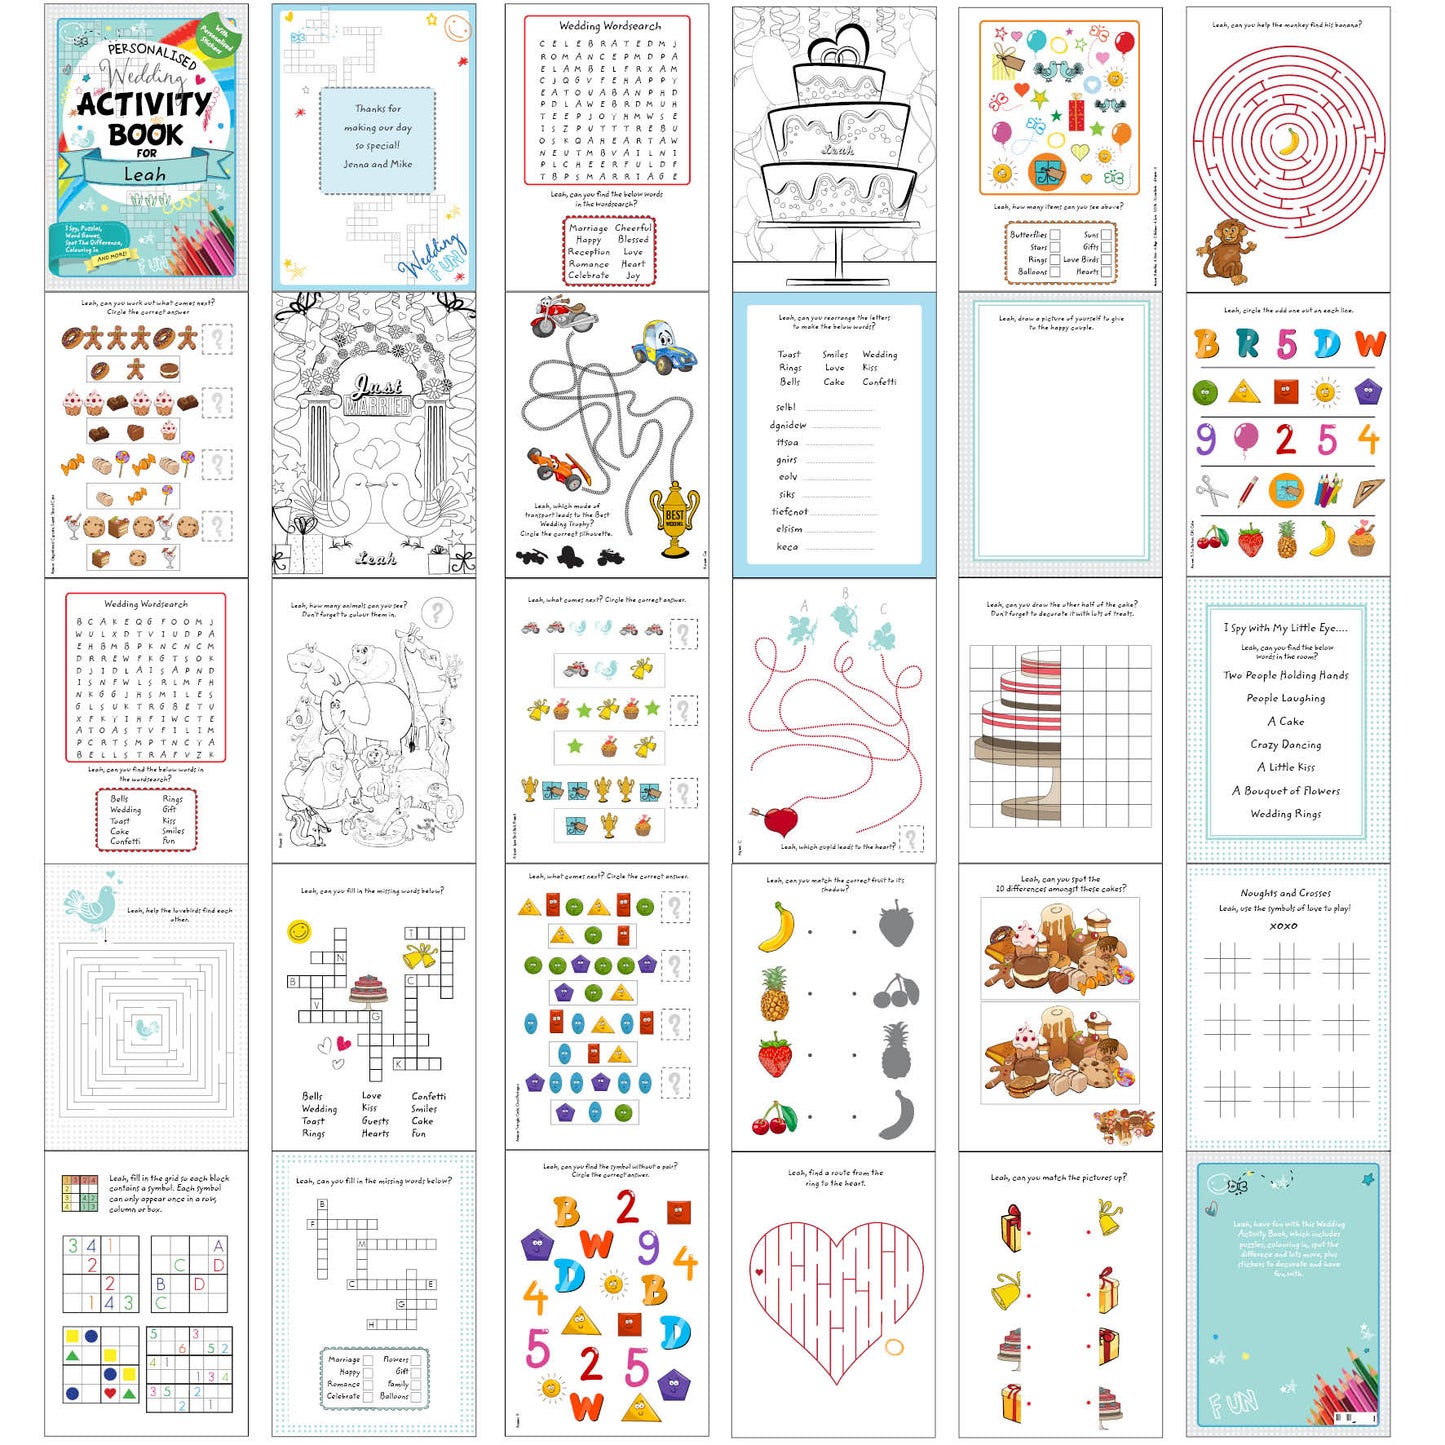 Wedding activity book with stickers, personalised - Lilybet loves